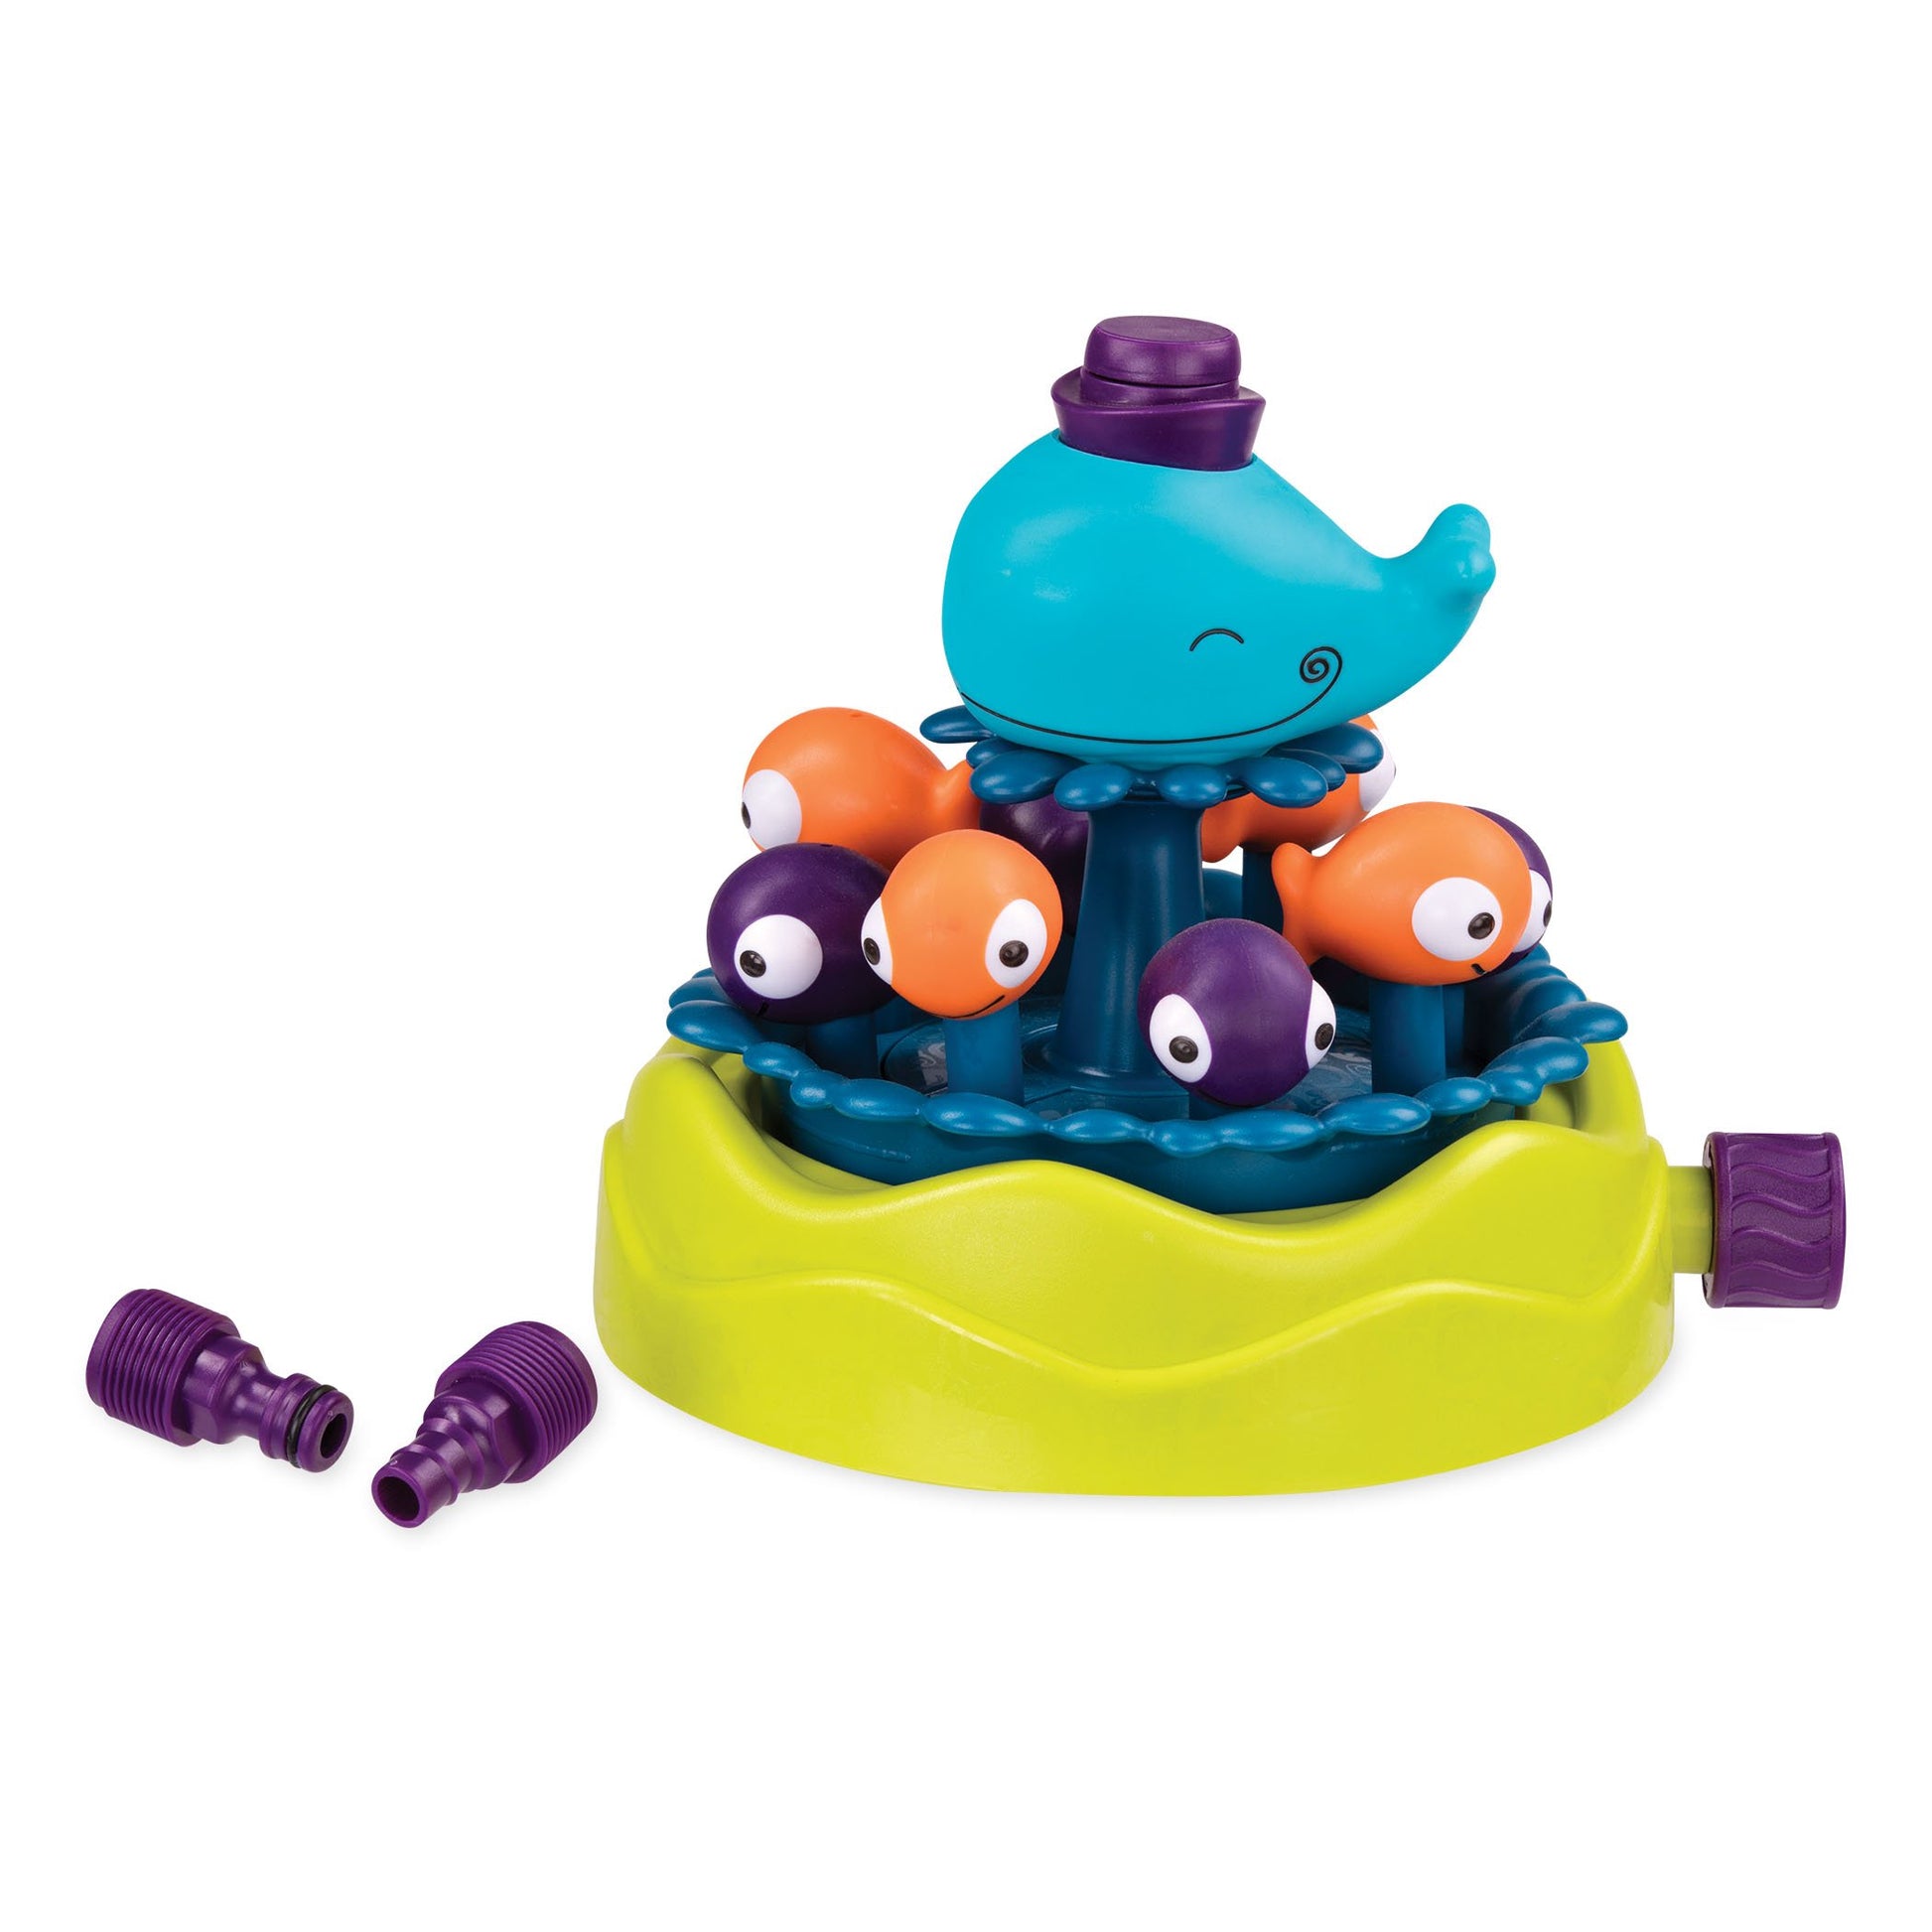 B. Whirly Whale Sprinkler The Toy Wagon